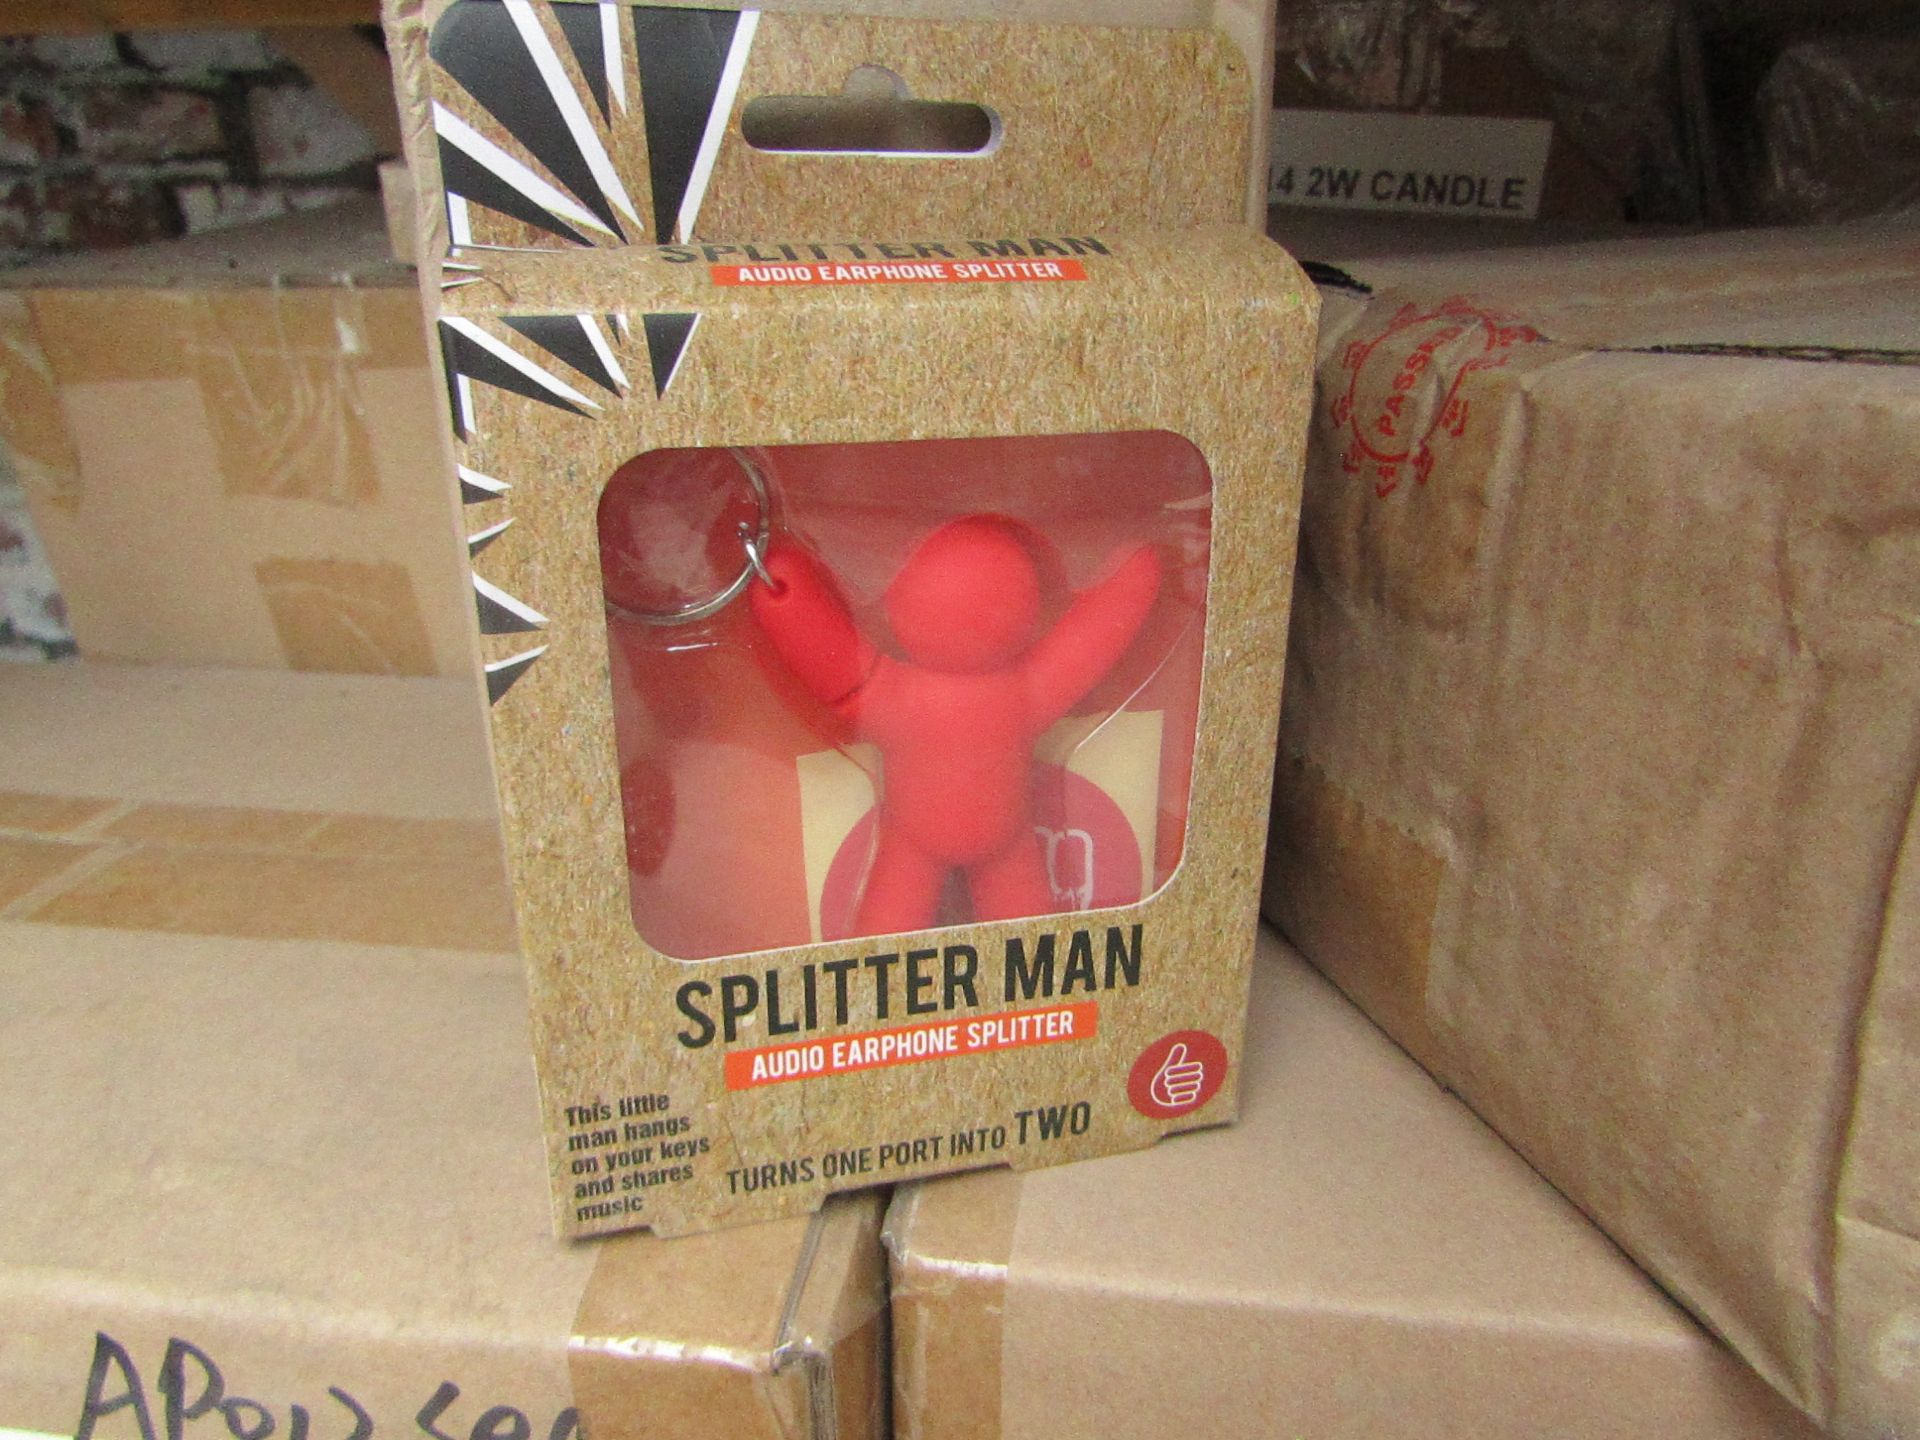 12x Splitter man key rings, allows sound sharing of a device to wired headphones, all new and boxed